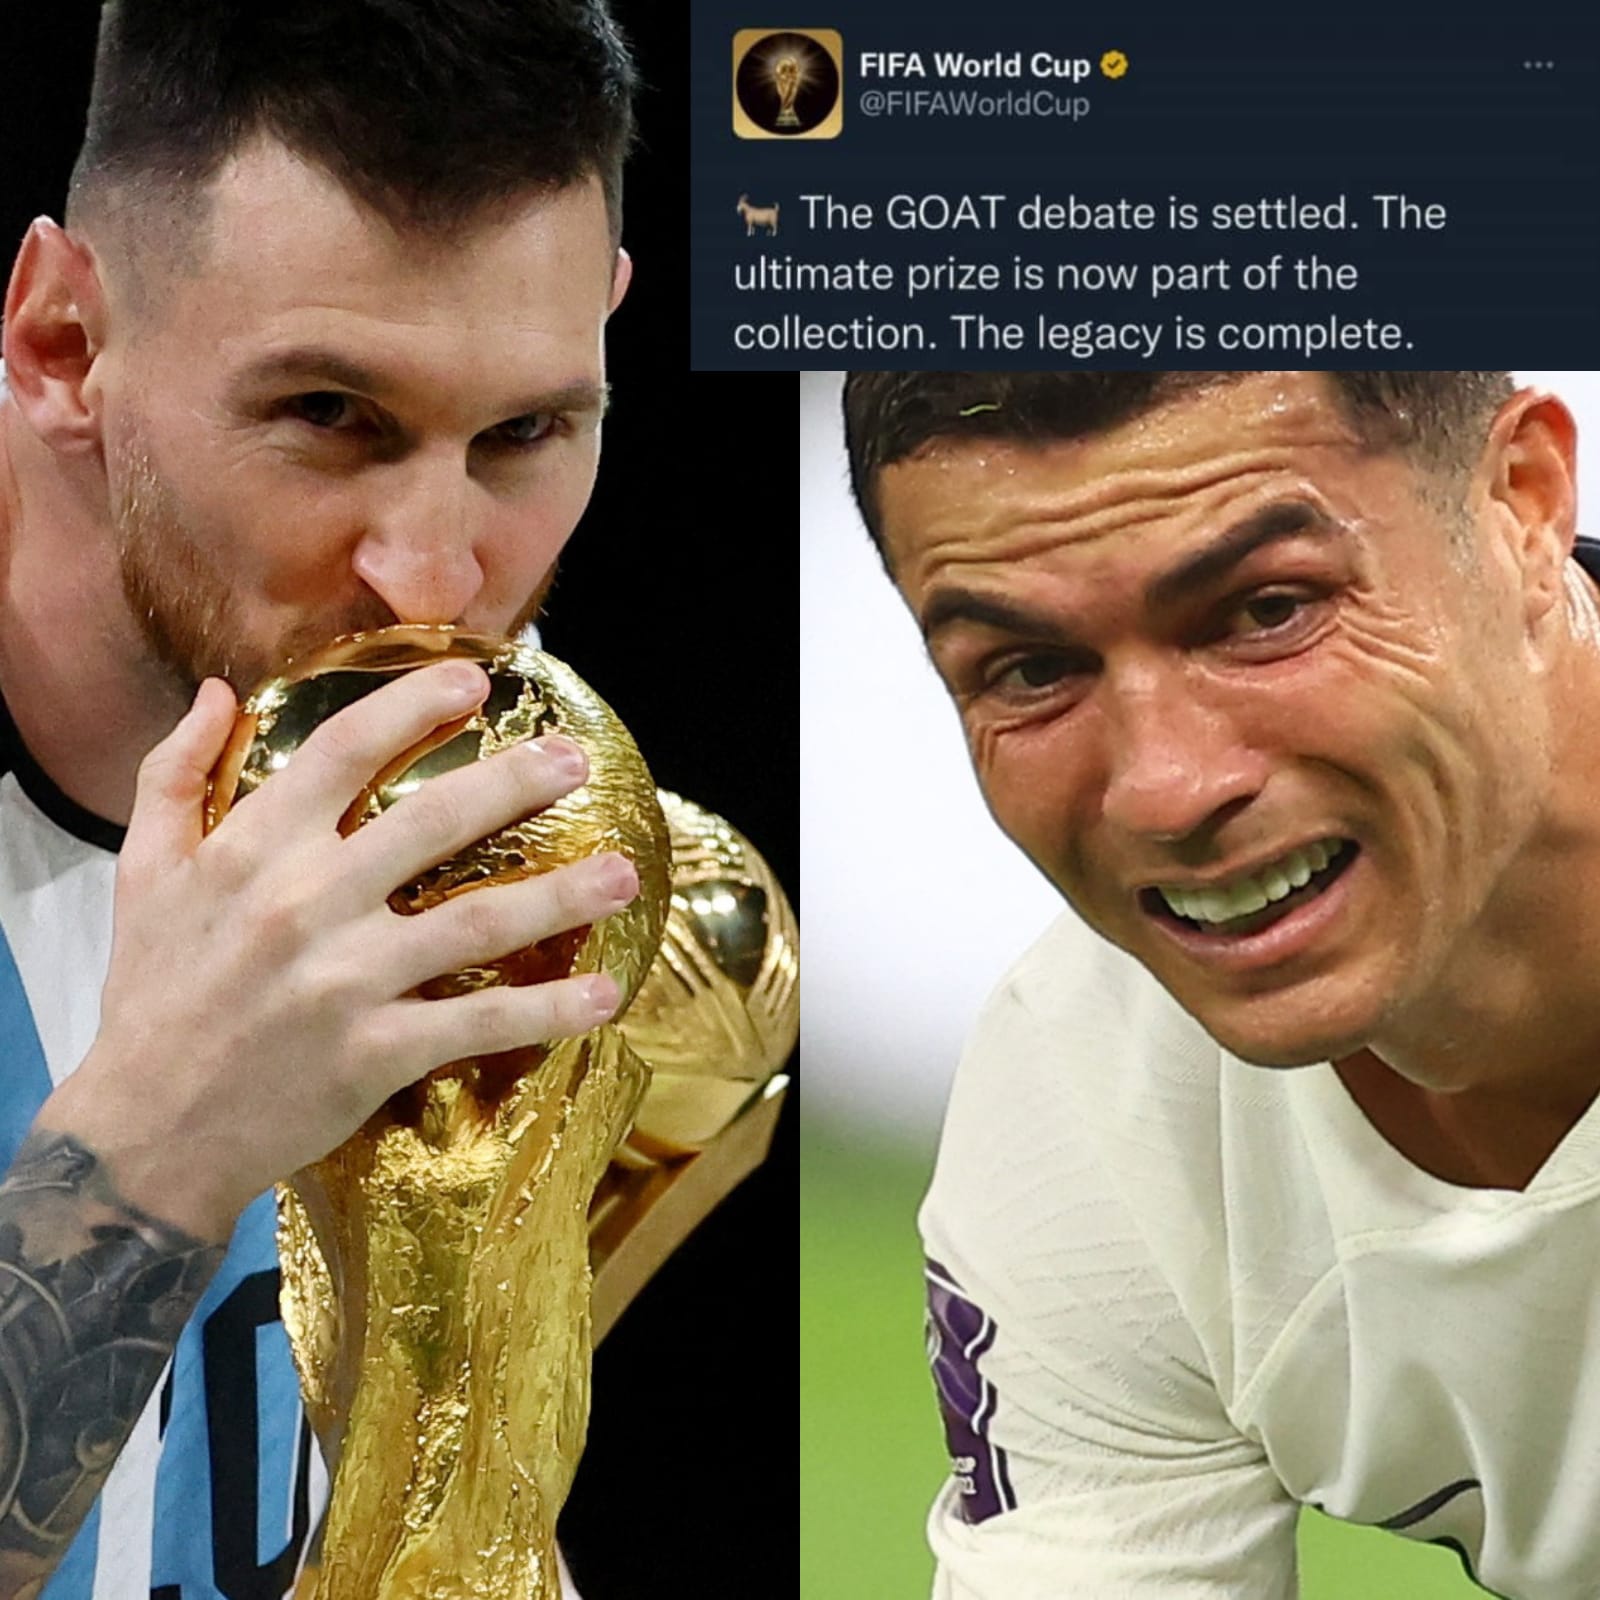 There's only one GOAT': fan edits iconic Messi-Ronaldo picture